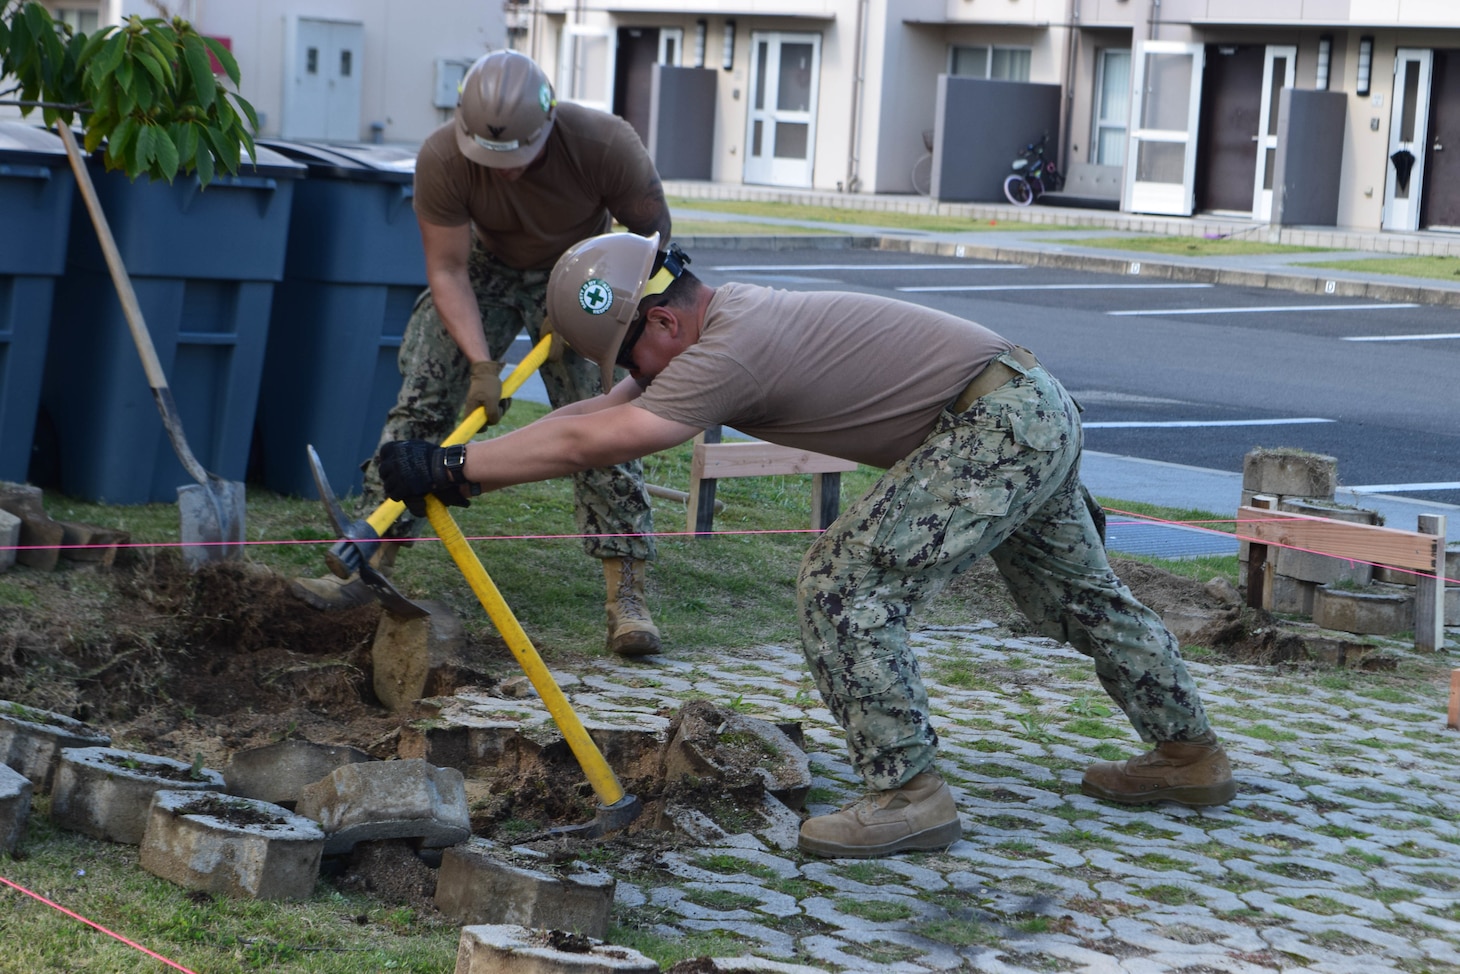 191028-N-EO124-0089 IWAKUNI, Japan (Oct. 28, 2019) Equipment Operator 3rd Class David Francis, from Jefferson City, Missouri, and Equipment Operator 3rd Class Zhen Liu, from Oxnard, California, both deployed with Naval Mobile Construction Battalion (NMCB) 5’s Detail Iwakuni, pull pavers with pickaxes to clear for excavation. NMCB-5 is deployed across the Indo-Pacific region conducting high-quality construction to support U.S. and partner stations to strengthen partnerships, deter aggression, and enable expeditionary logistics and naval power projection.